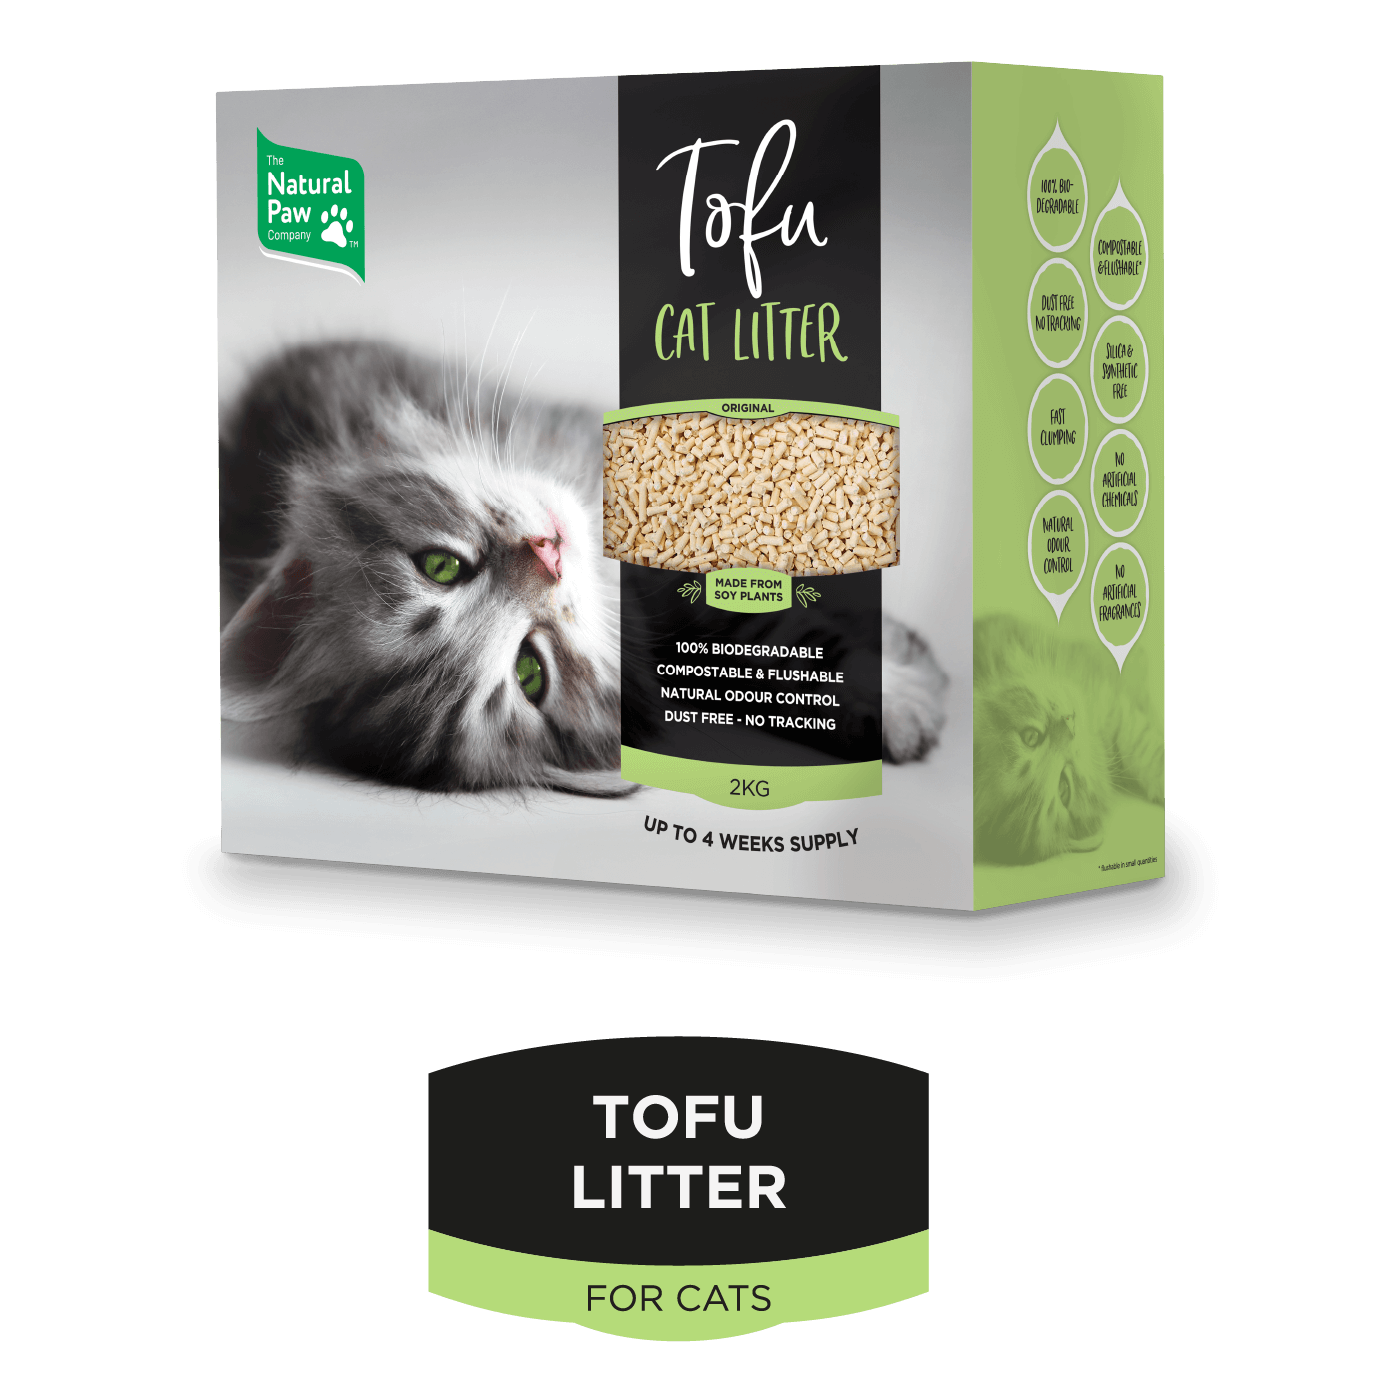 The Natural Paw Company Biodegradable Tofu Cat Litter & Natural Baked